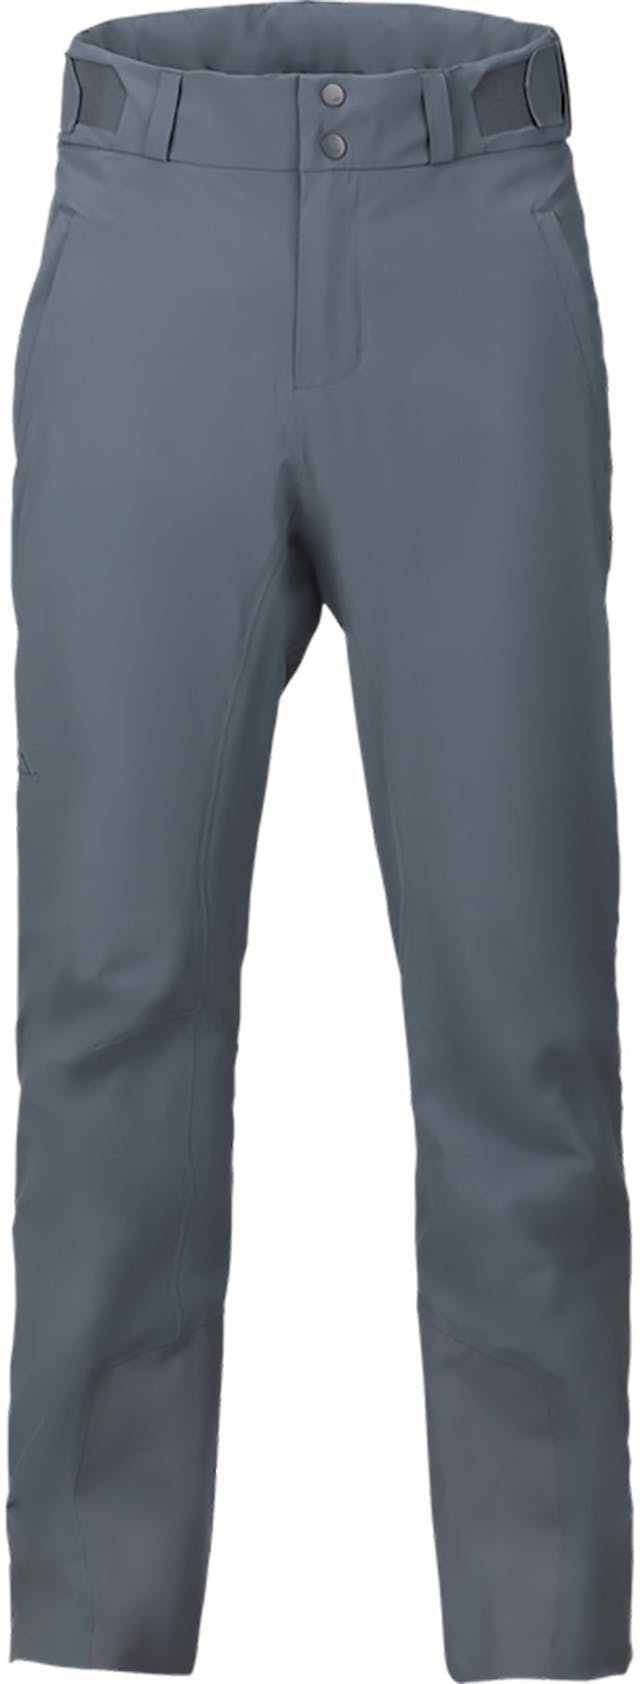 Product image for Curve Stretch Pants - Men’s